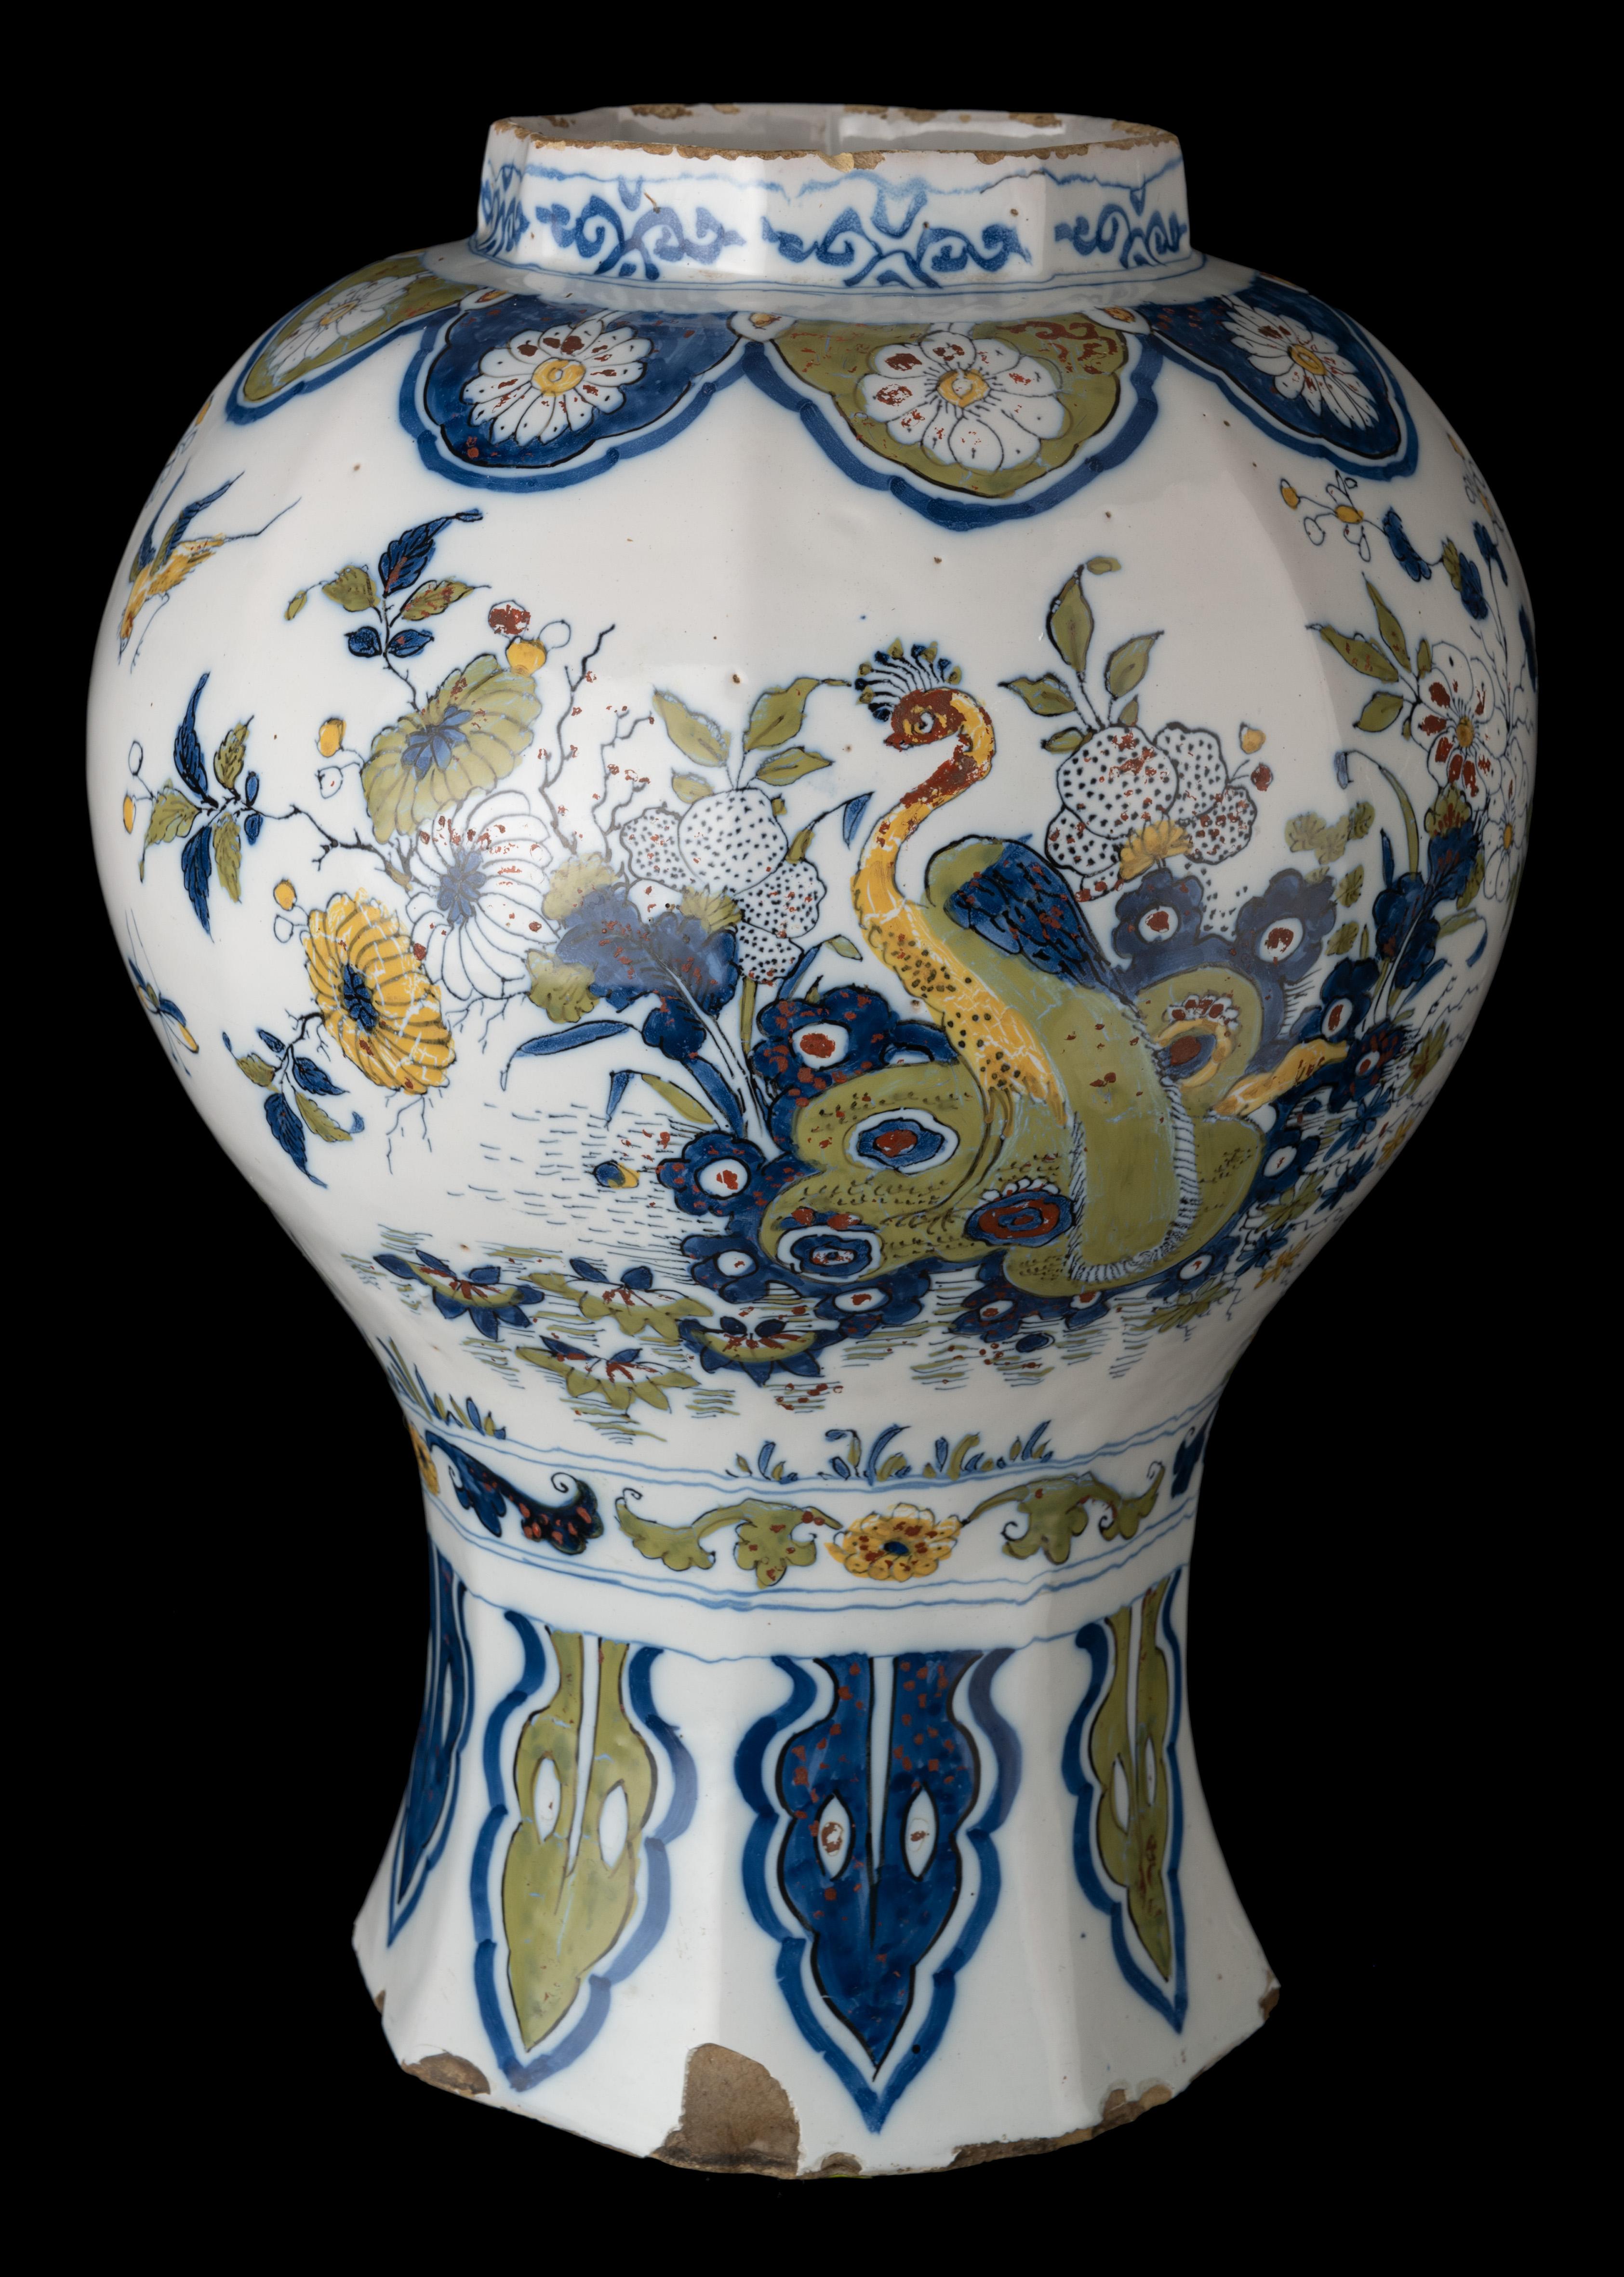 17th Century Delft Polychrome Covered Jar with Peacock and Dragon in Landscape, 1690-1700 For Sale